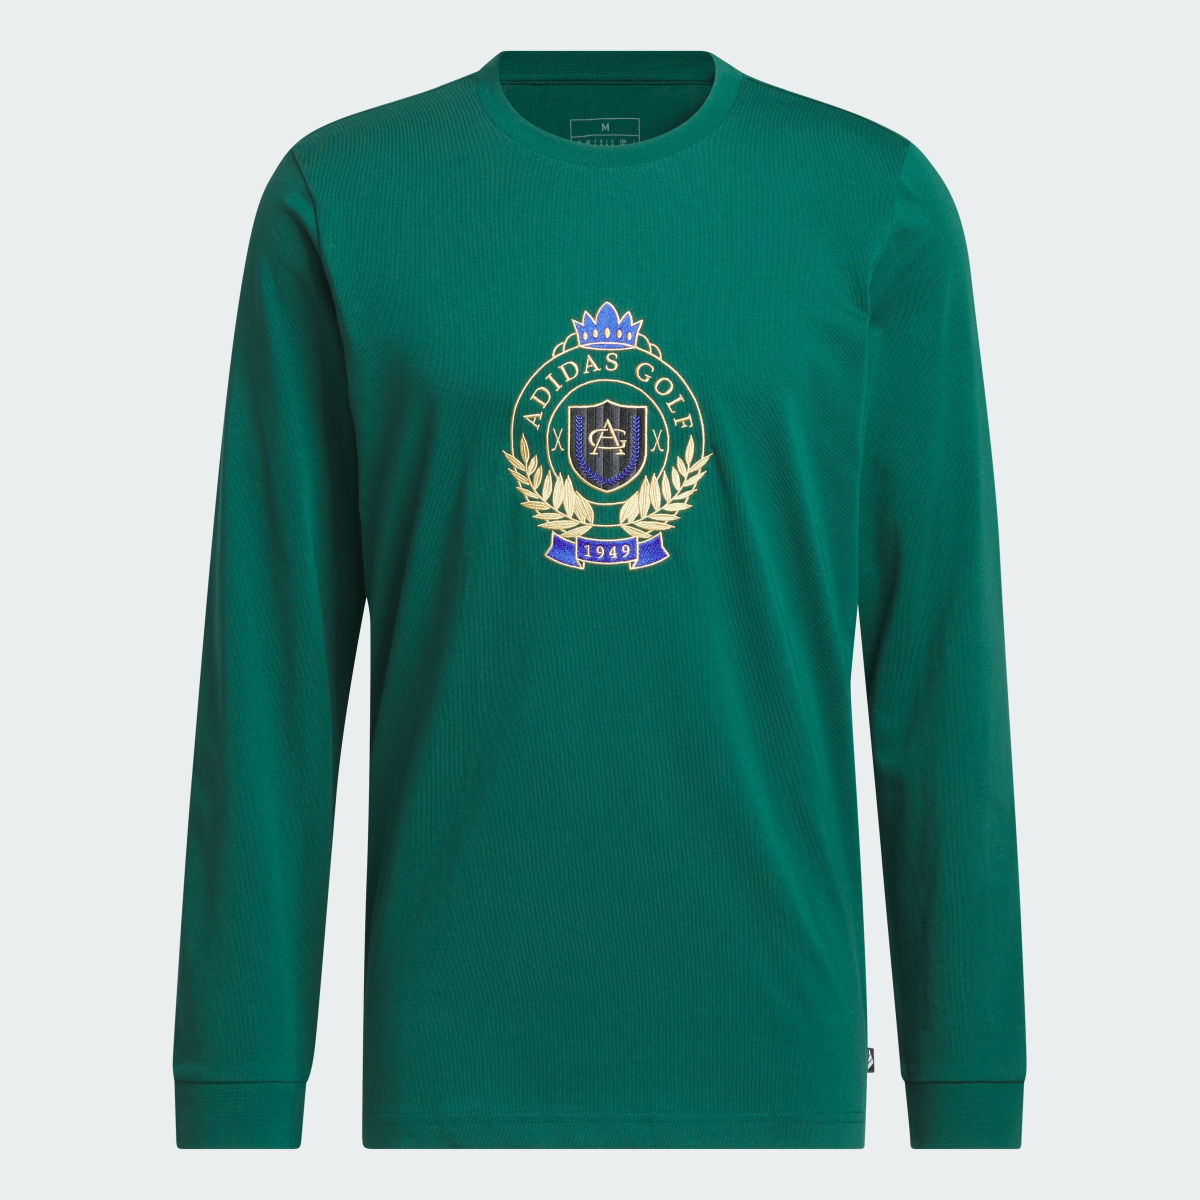 Adidas Go-To Crest Graphic Long Sleeve T-Shirt. 7